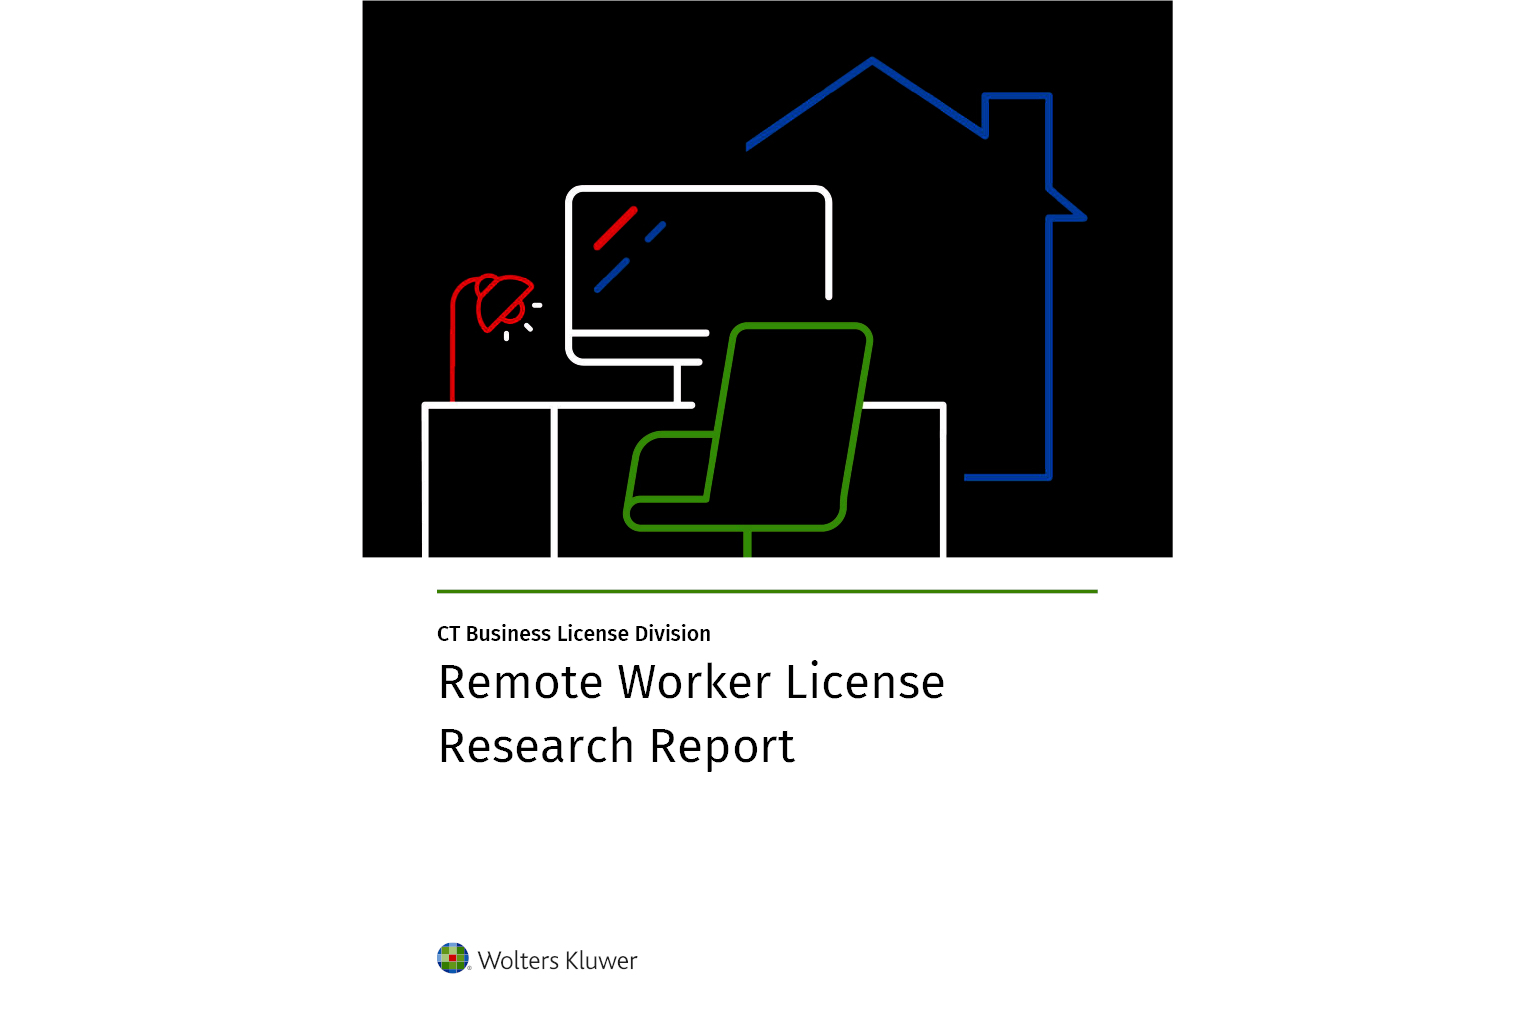 Remote worker business license research report from CT Corporation